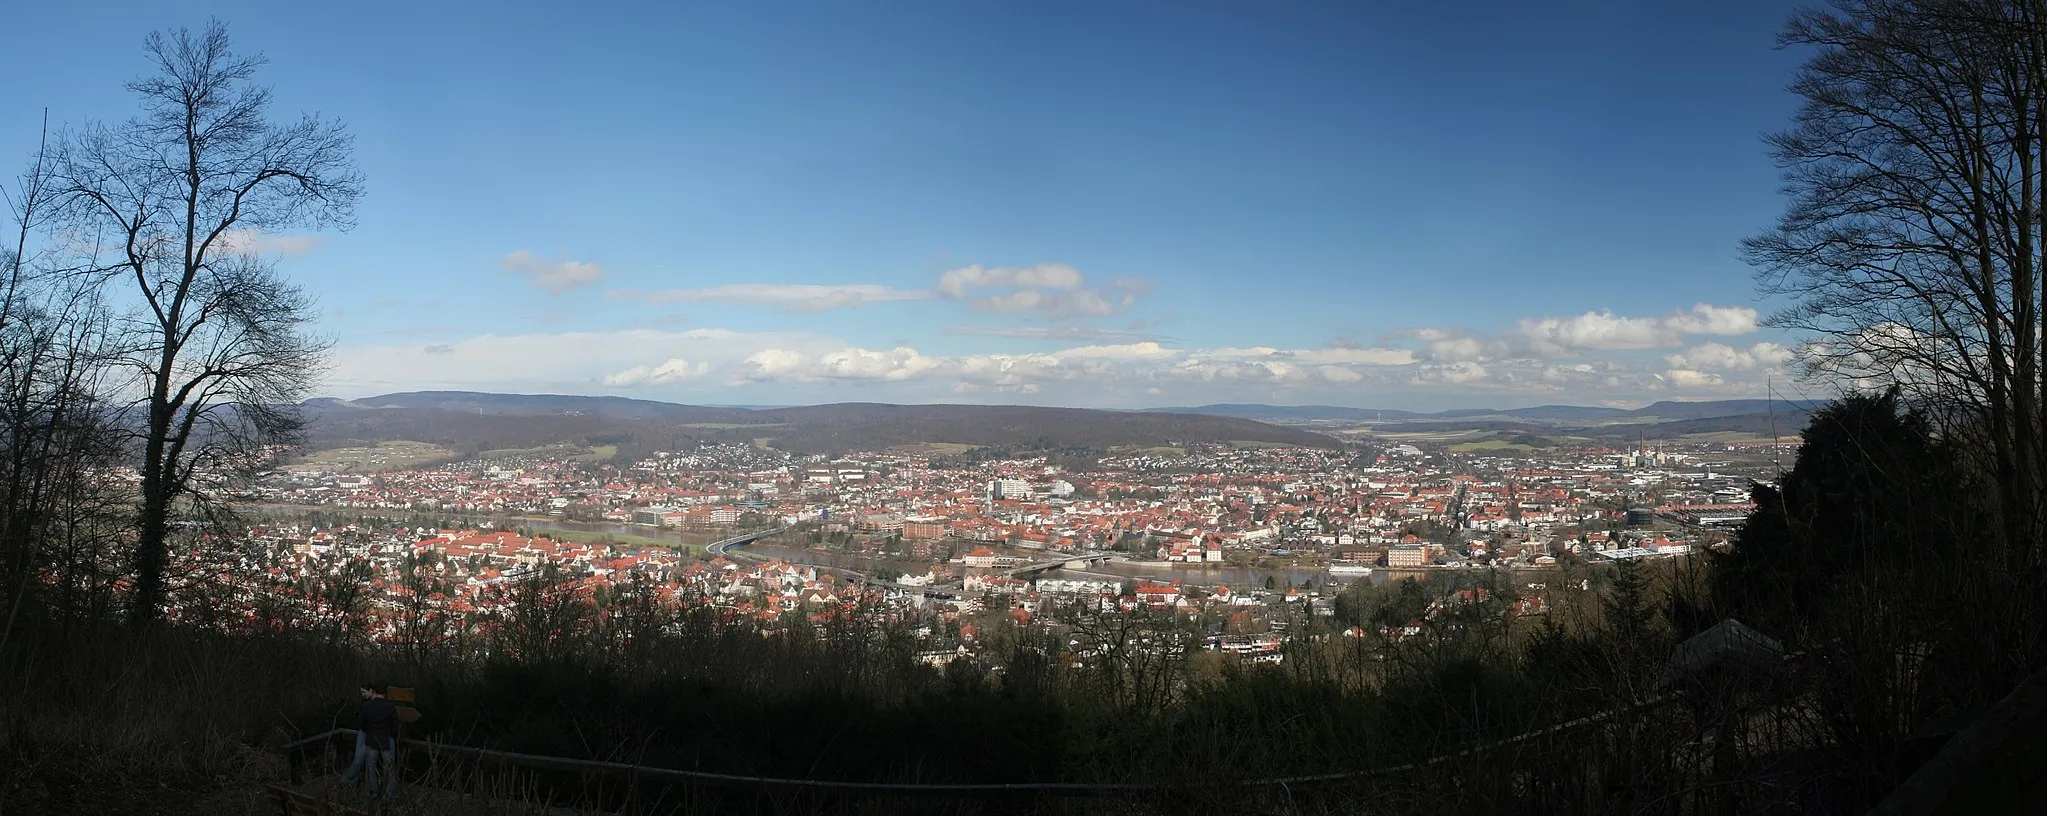 Photo showing: Panoramic view over the city of Hameln (Hamelin) in Germany. This photo is stiched together from 5 pictures. It was shot with the help of a polarization filter and a tripod.